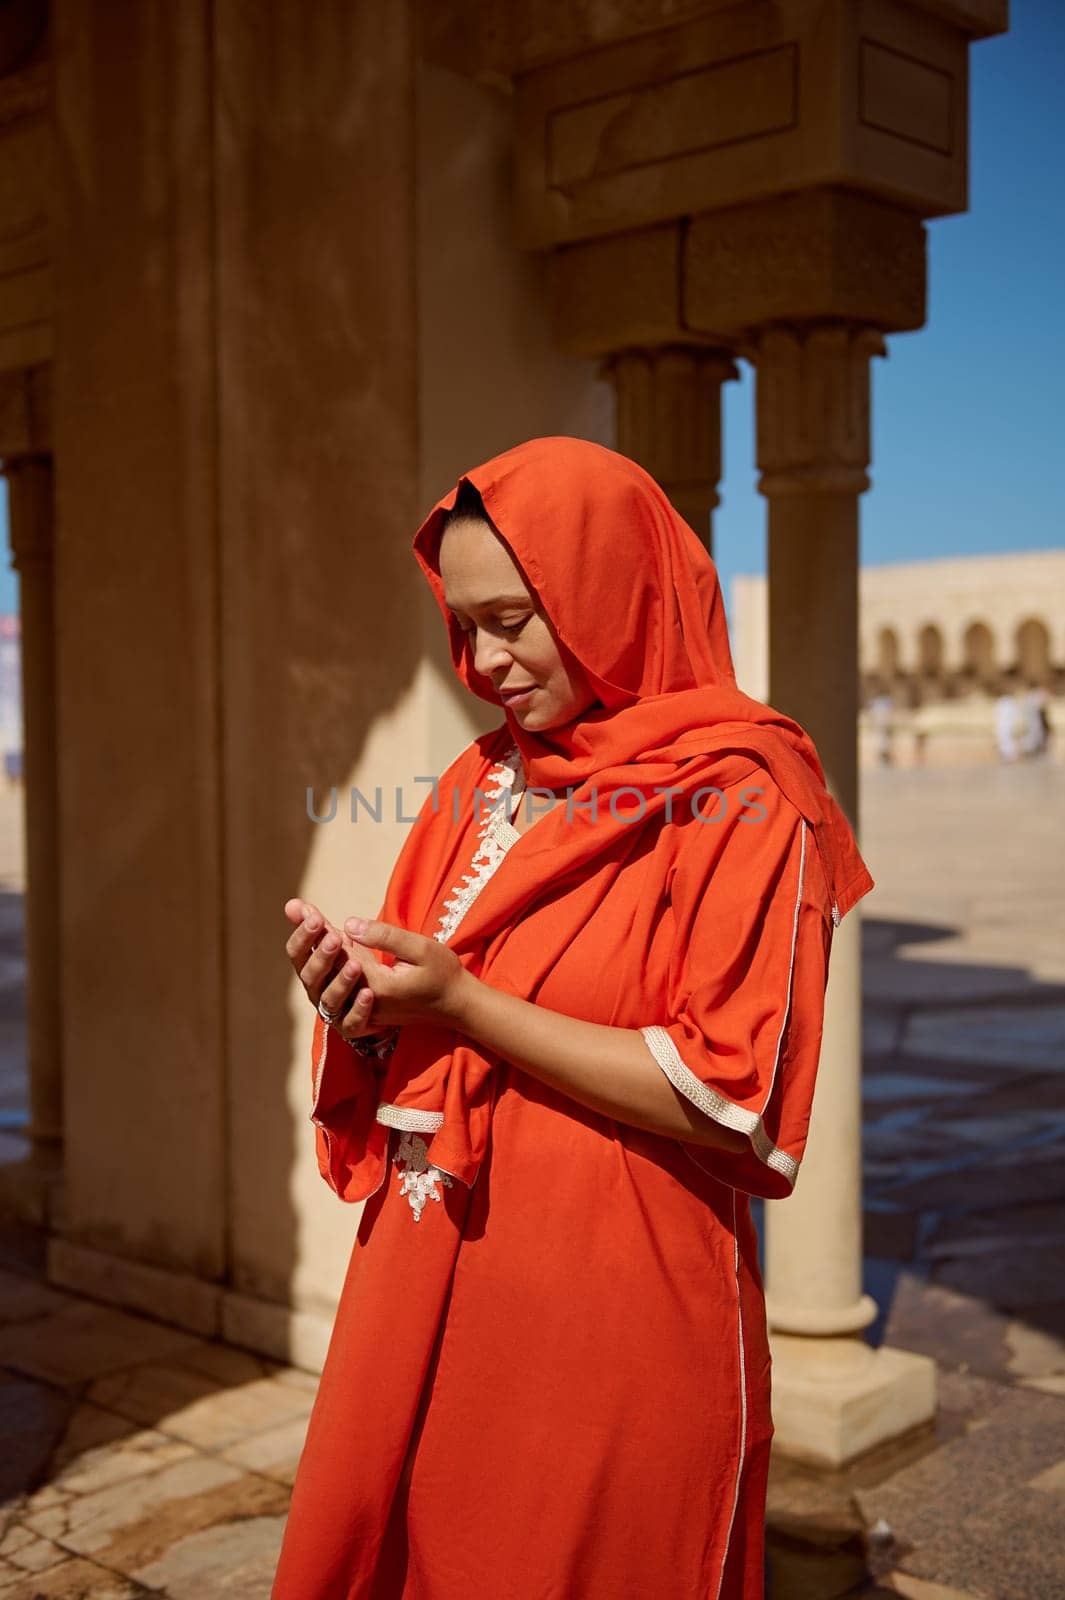 Portrait of young Arabic Muslim woman praying standing near marble columns at mosque. Religious lady with her eyes closed, in bright orange head scarf making Islamic pray Dua gesture with cupped hands